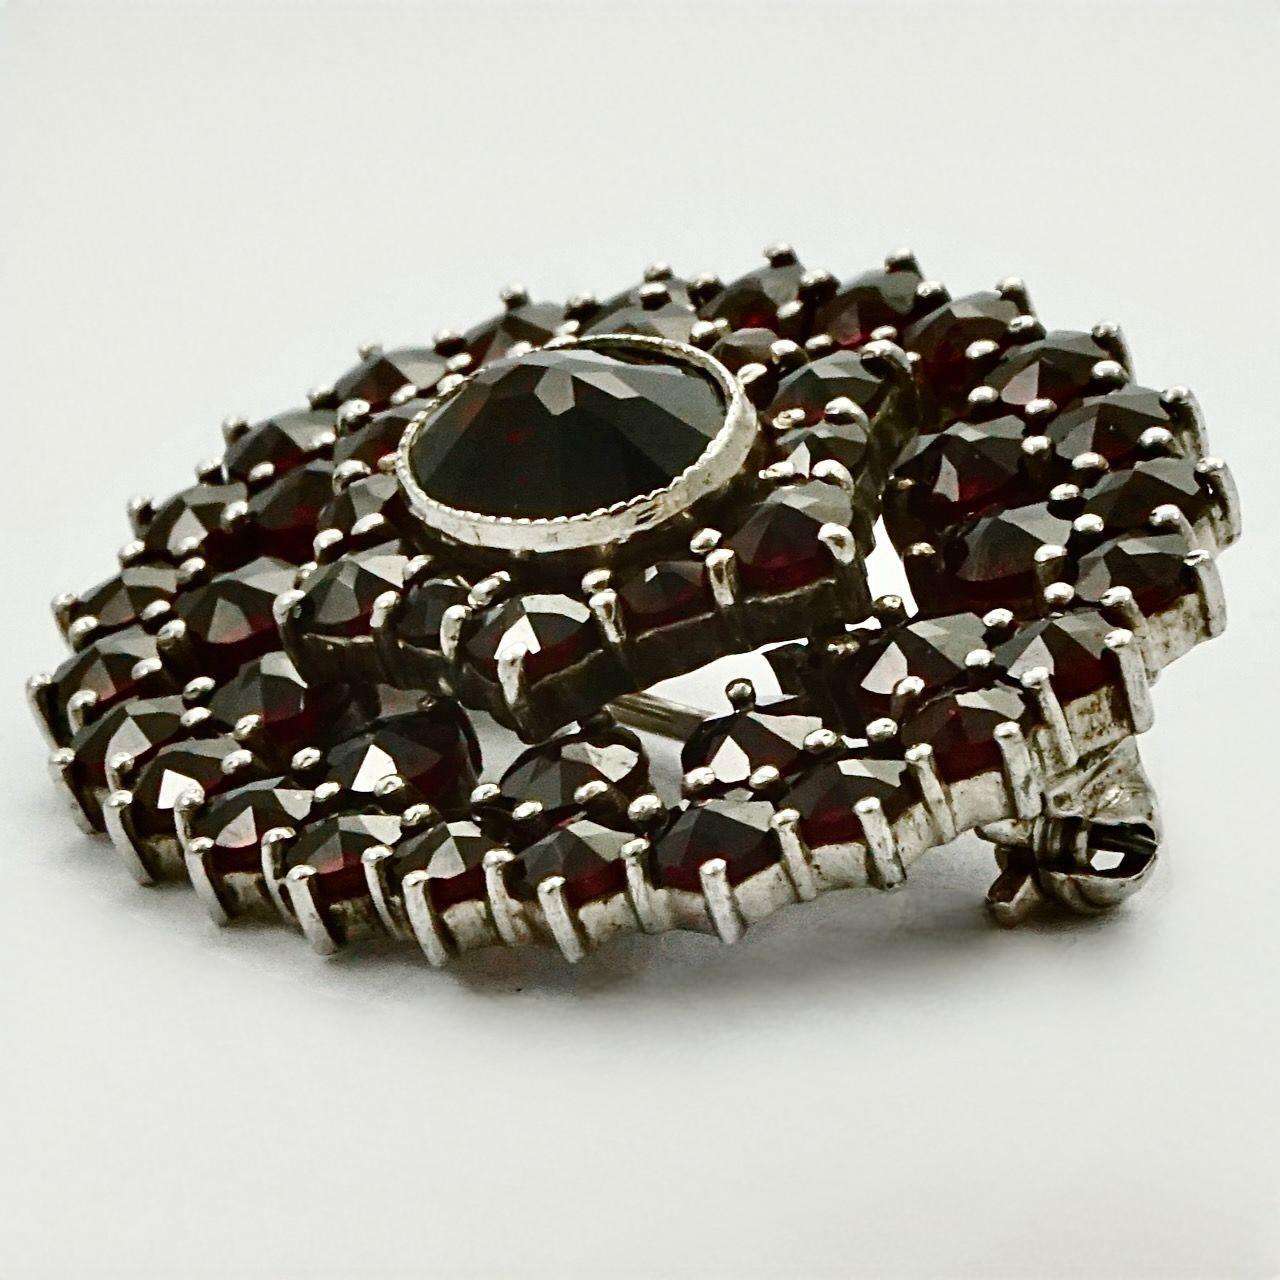 Oval Silver and Garnet Brooch circa 1930s In Good Condition For Sale In London, GB